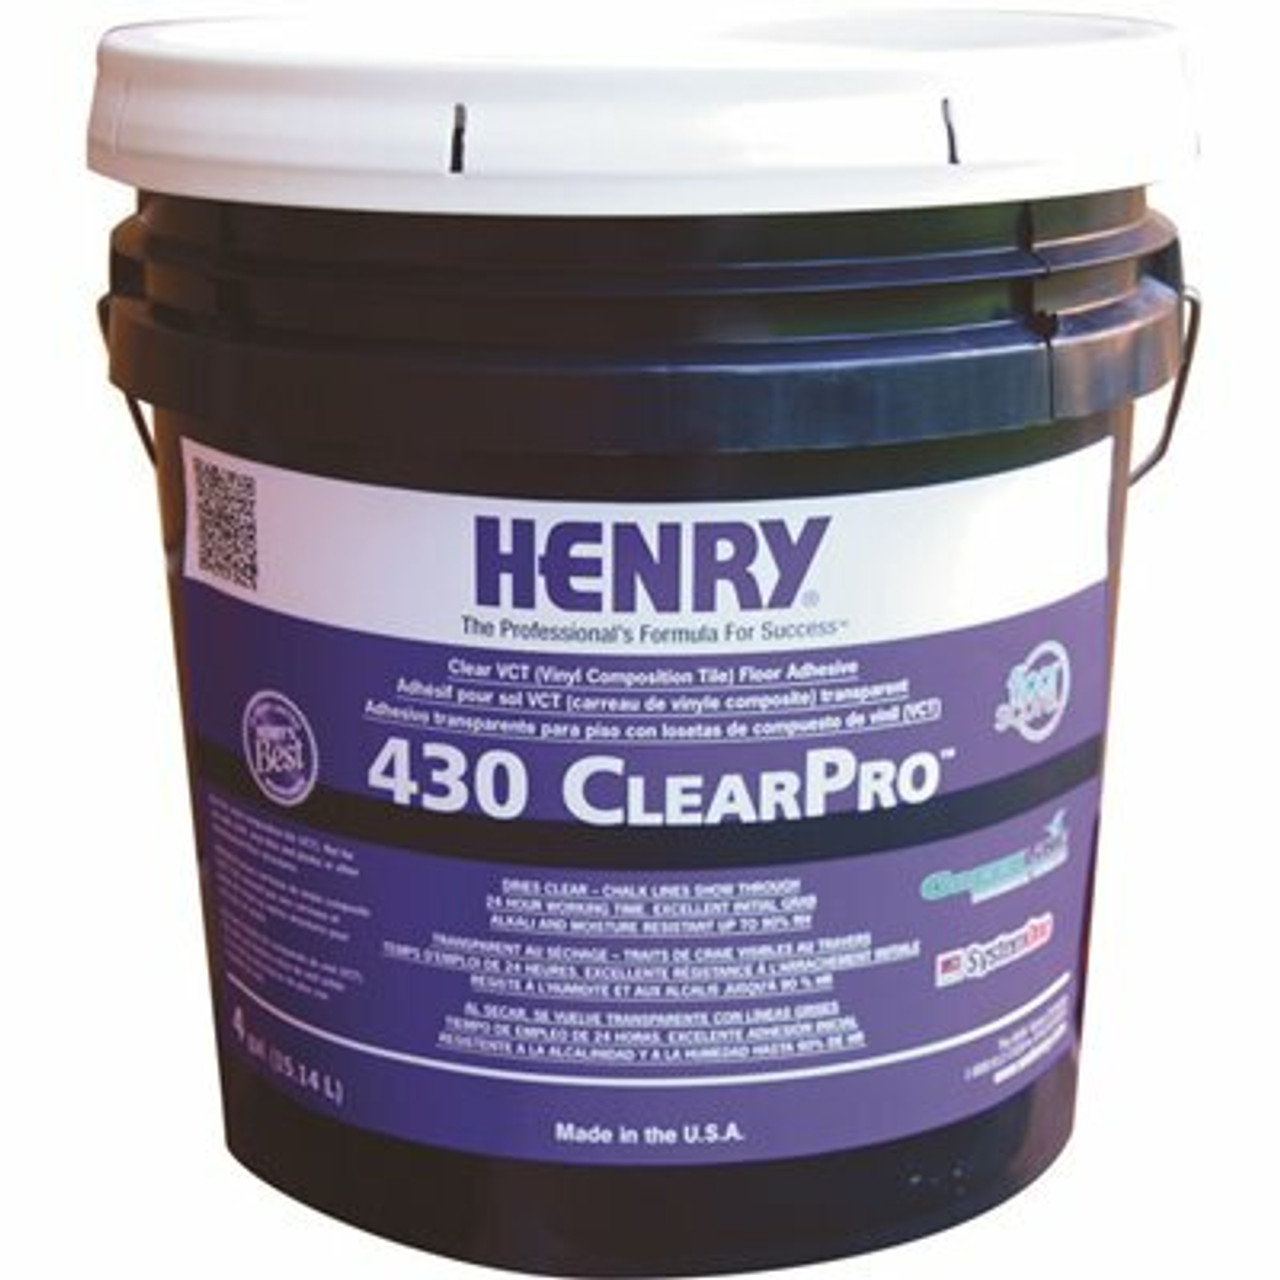 Henry 430 4 Gal. Clearpro Vct Adhesive